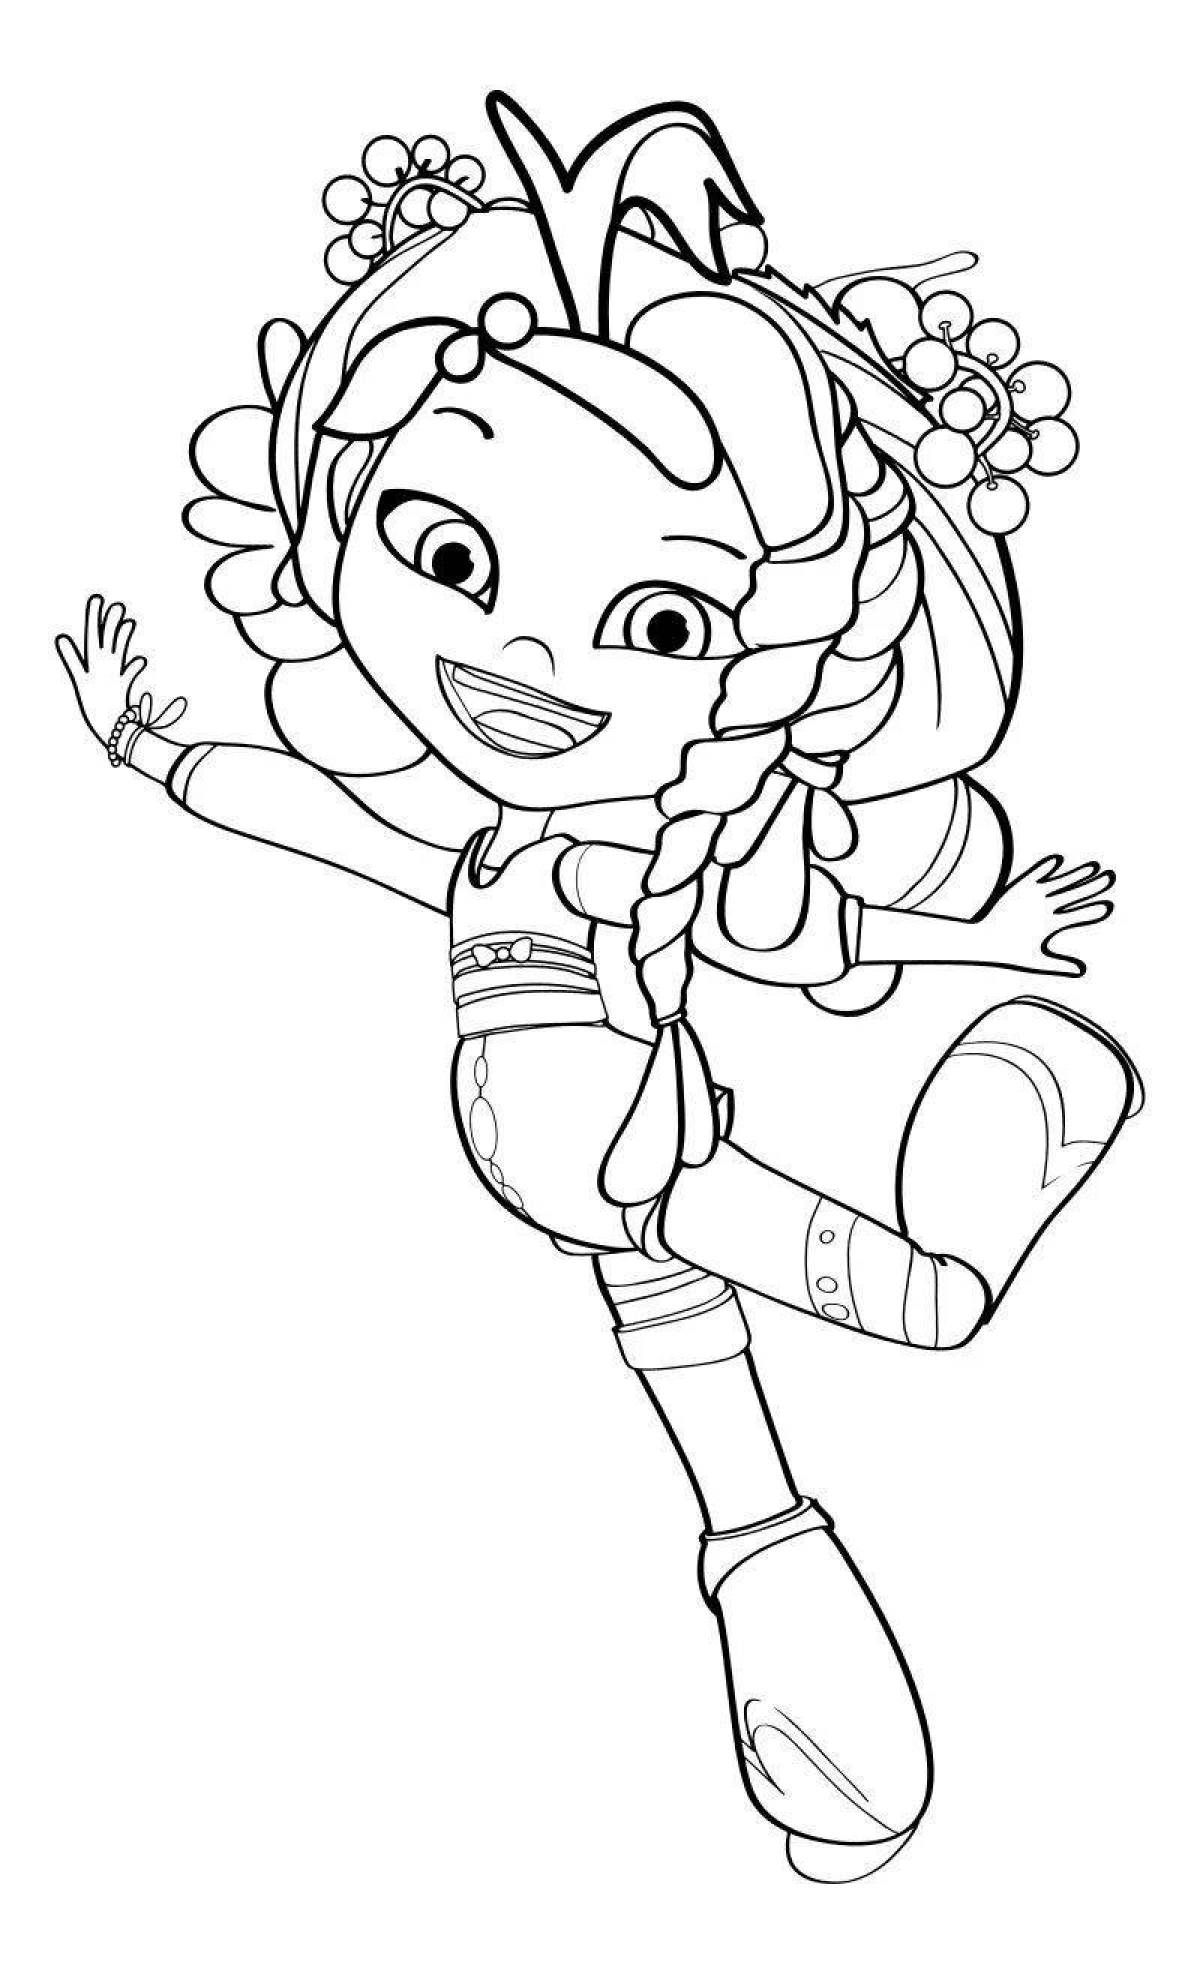 Glorious Patrol coloring pages for 6-7 year olds